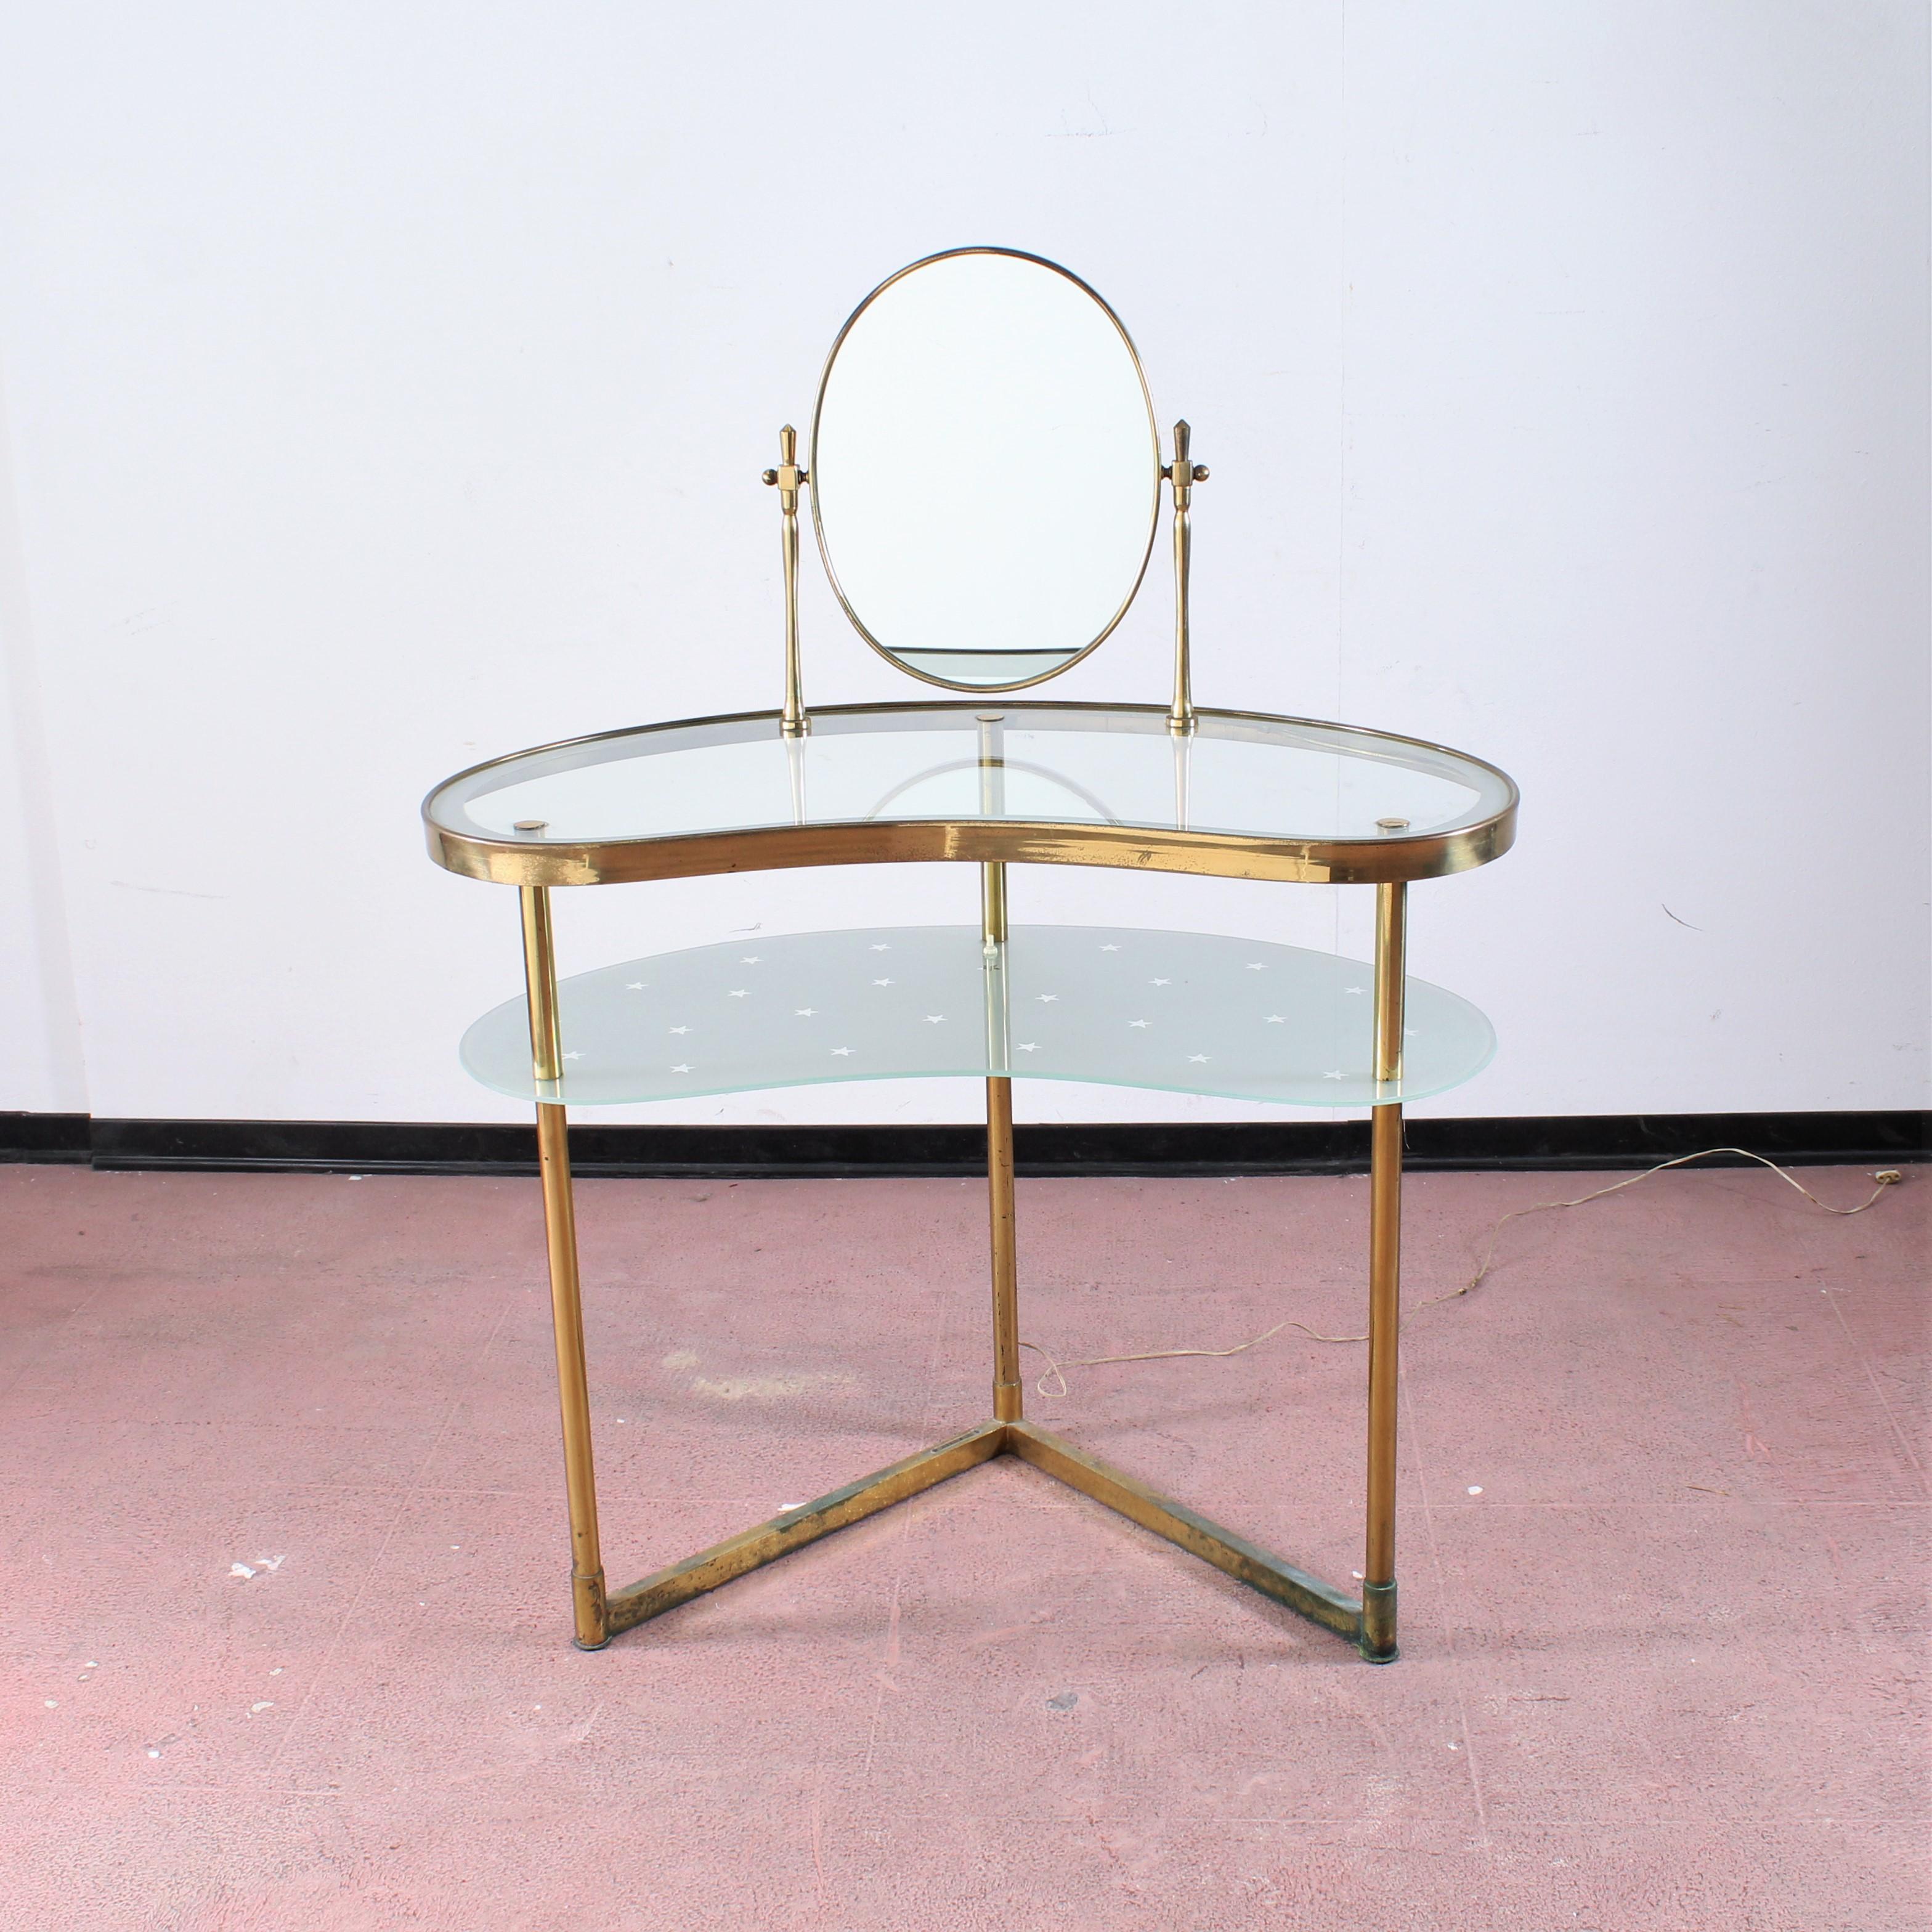 Wonderful brass and glass vanity with tilting mirror. The lighting enhances the starry motif.
Attributed to Luigi Brusotti, 1940s, Italy
Wear consistent with age and use.